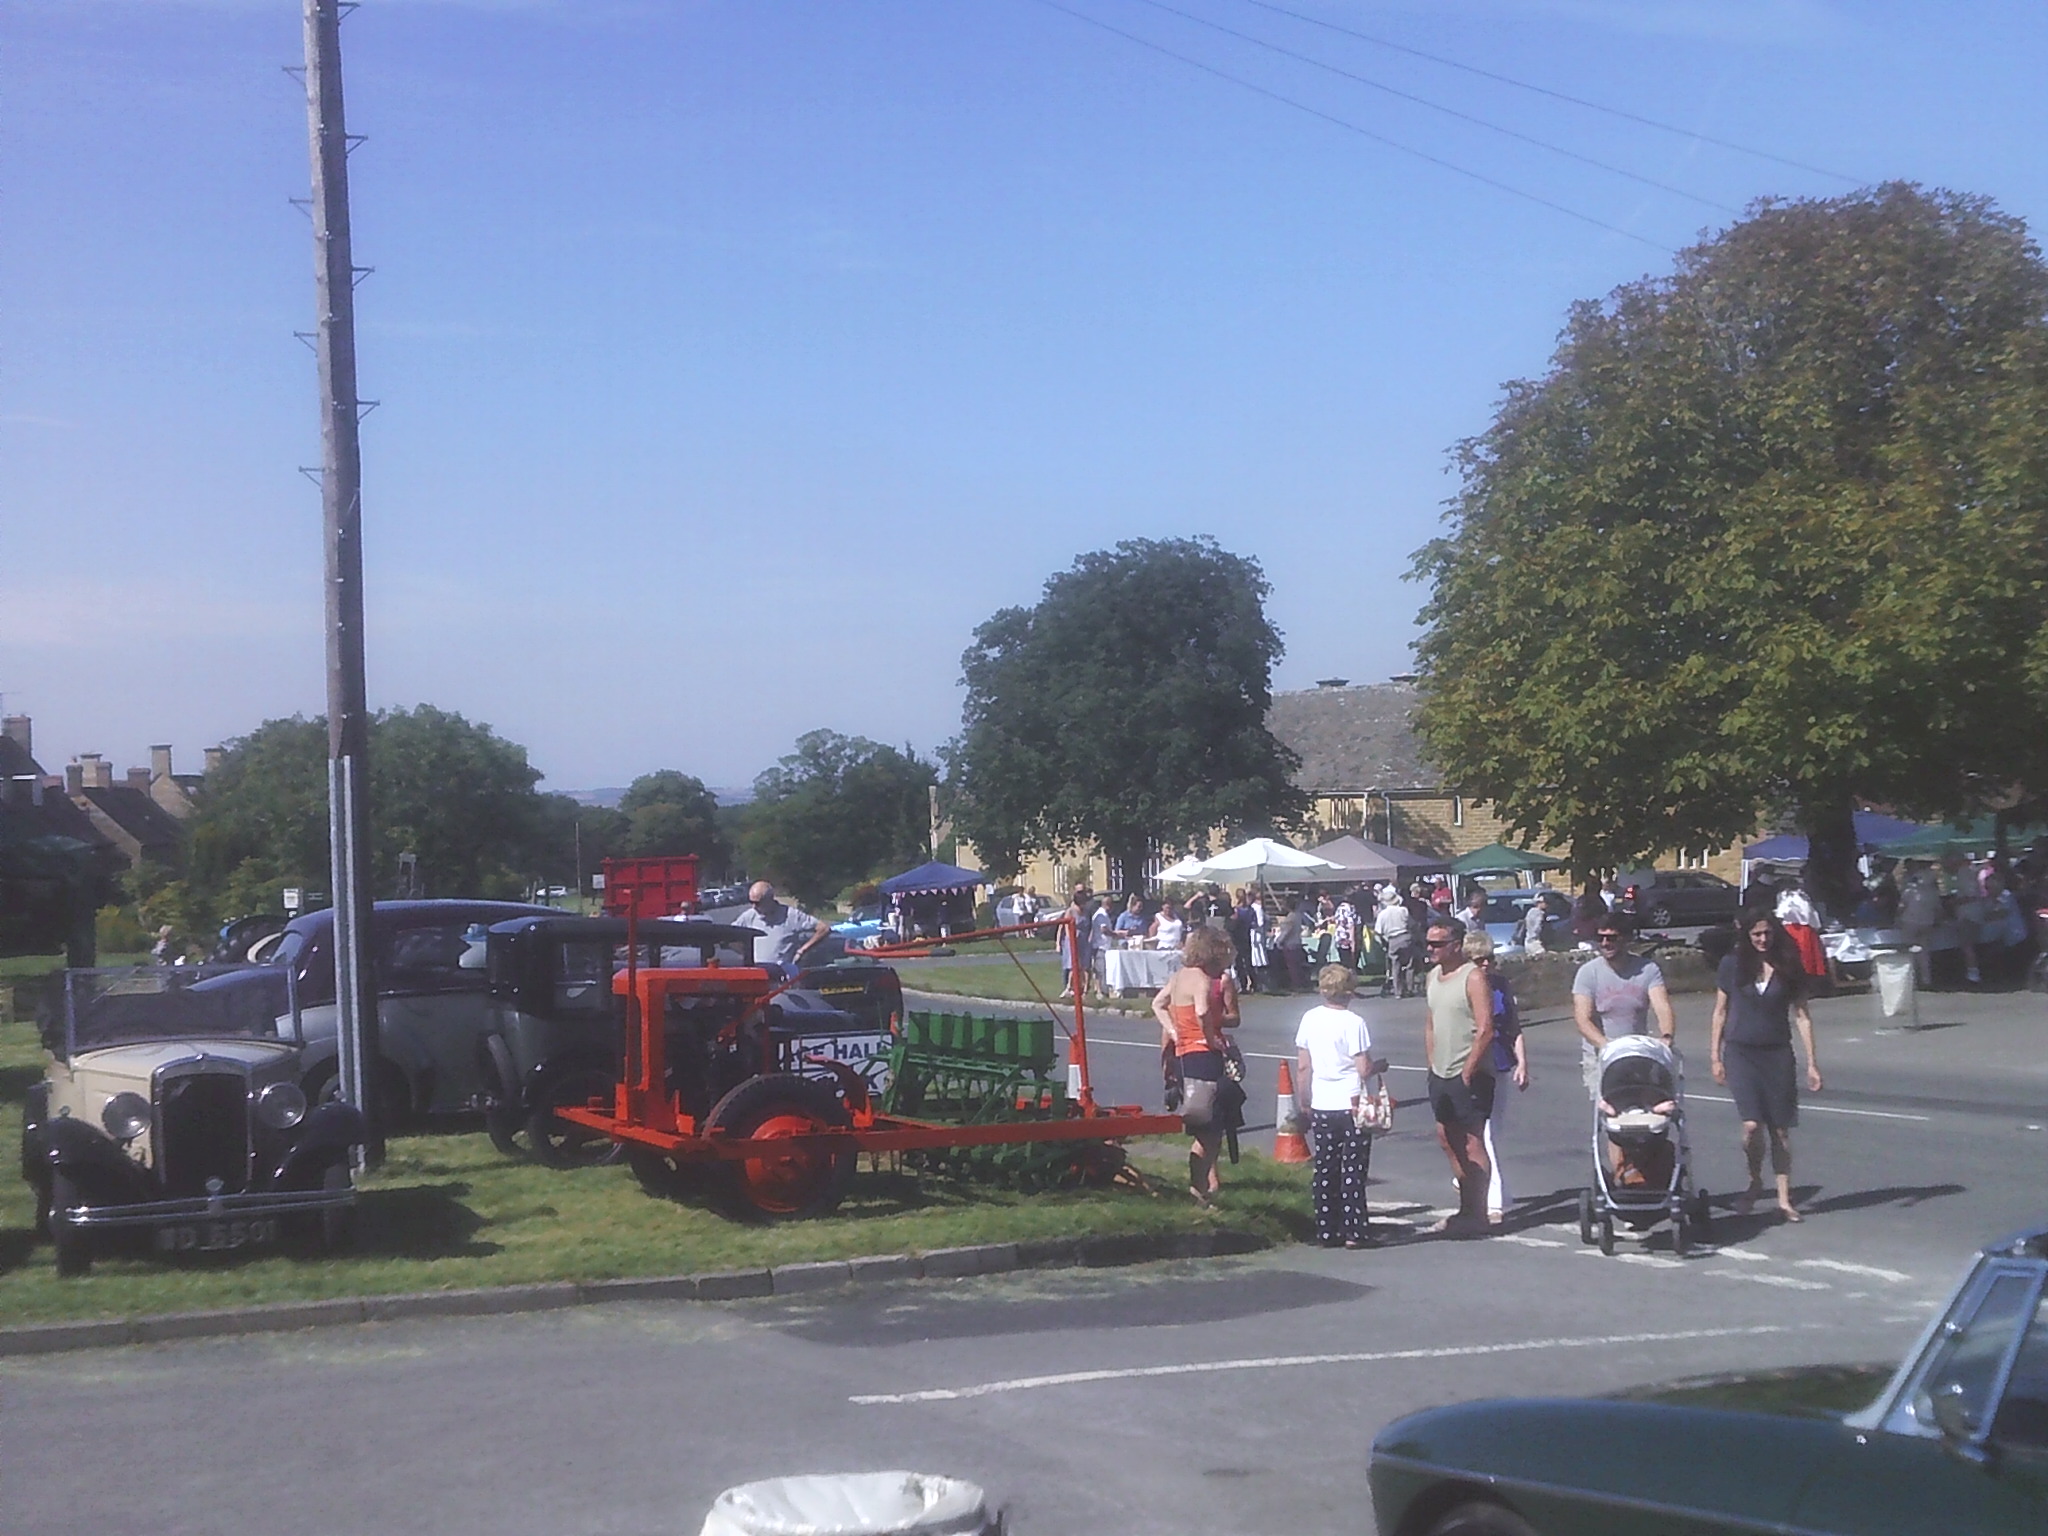 Overall View at the Willersey Show